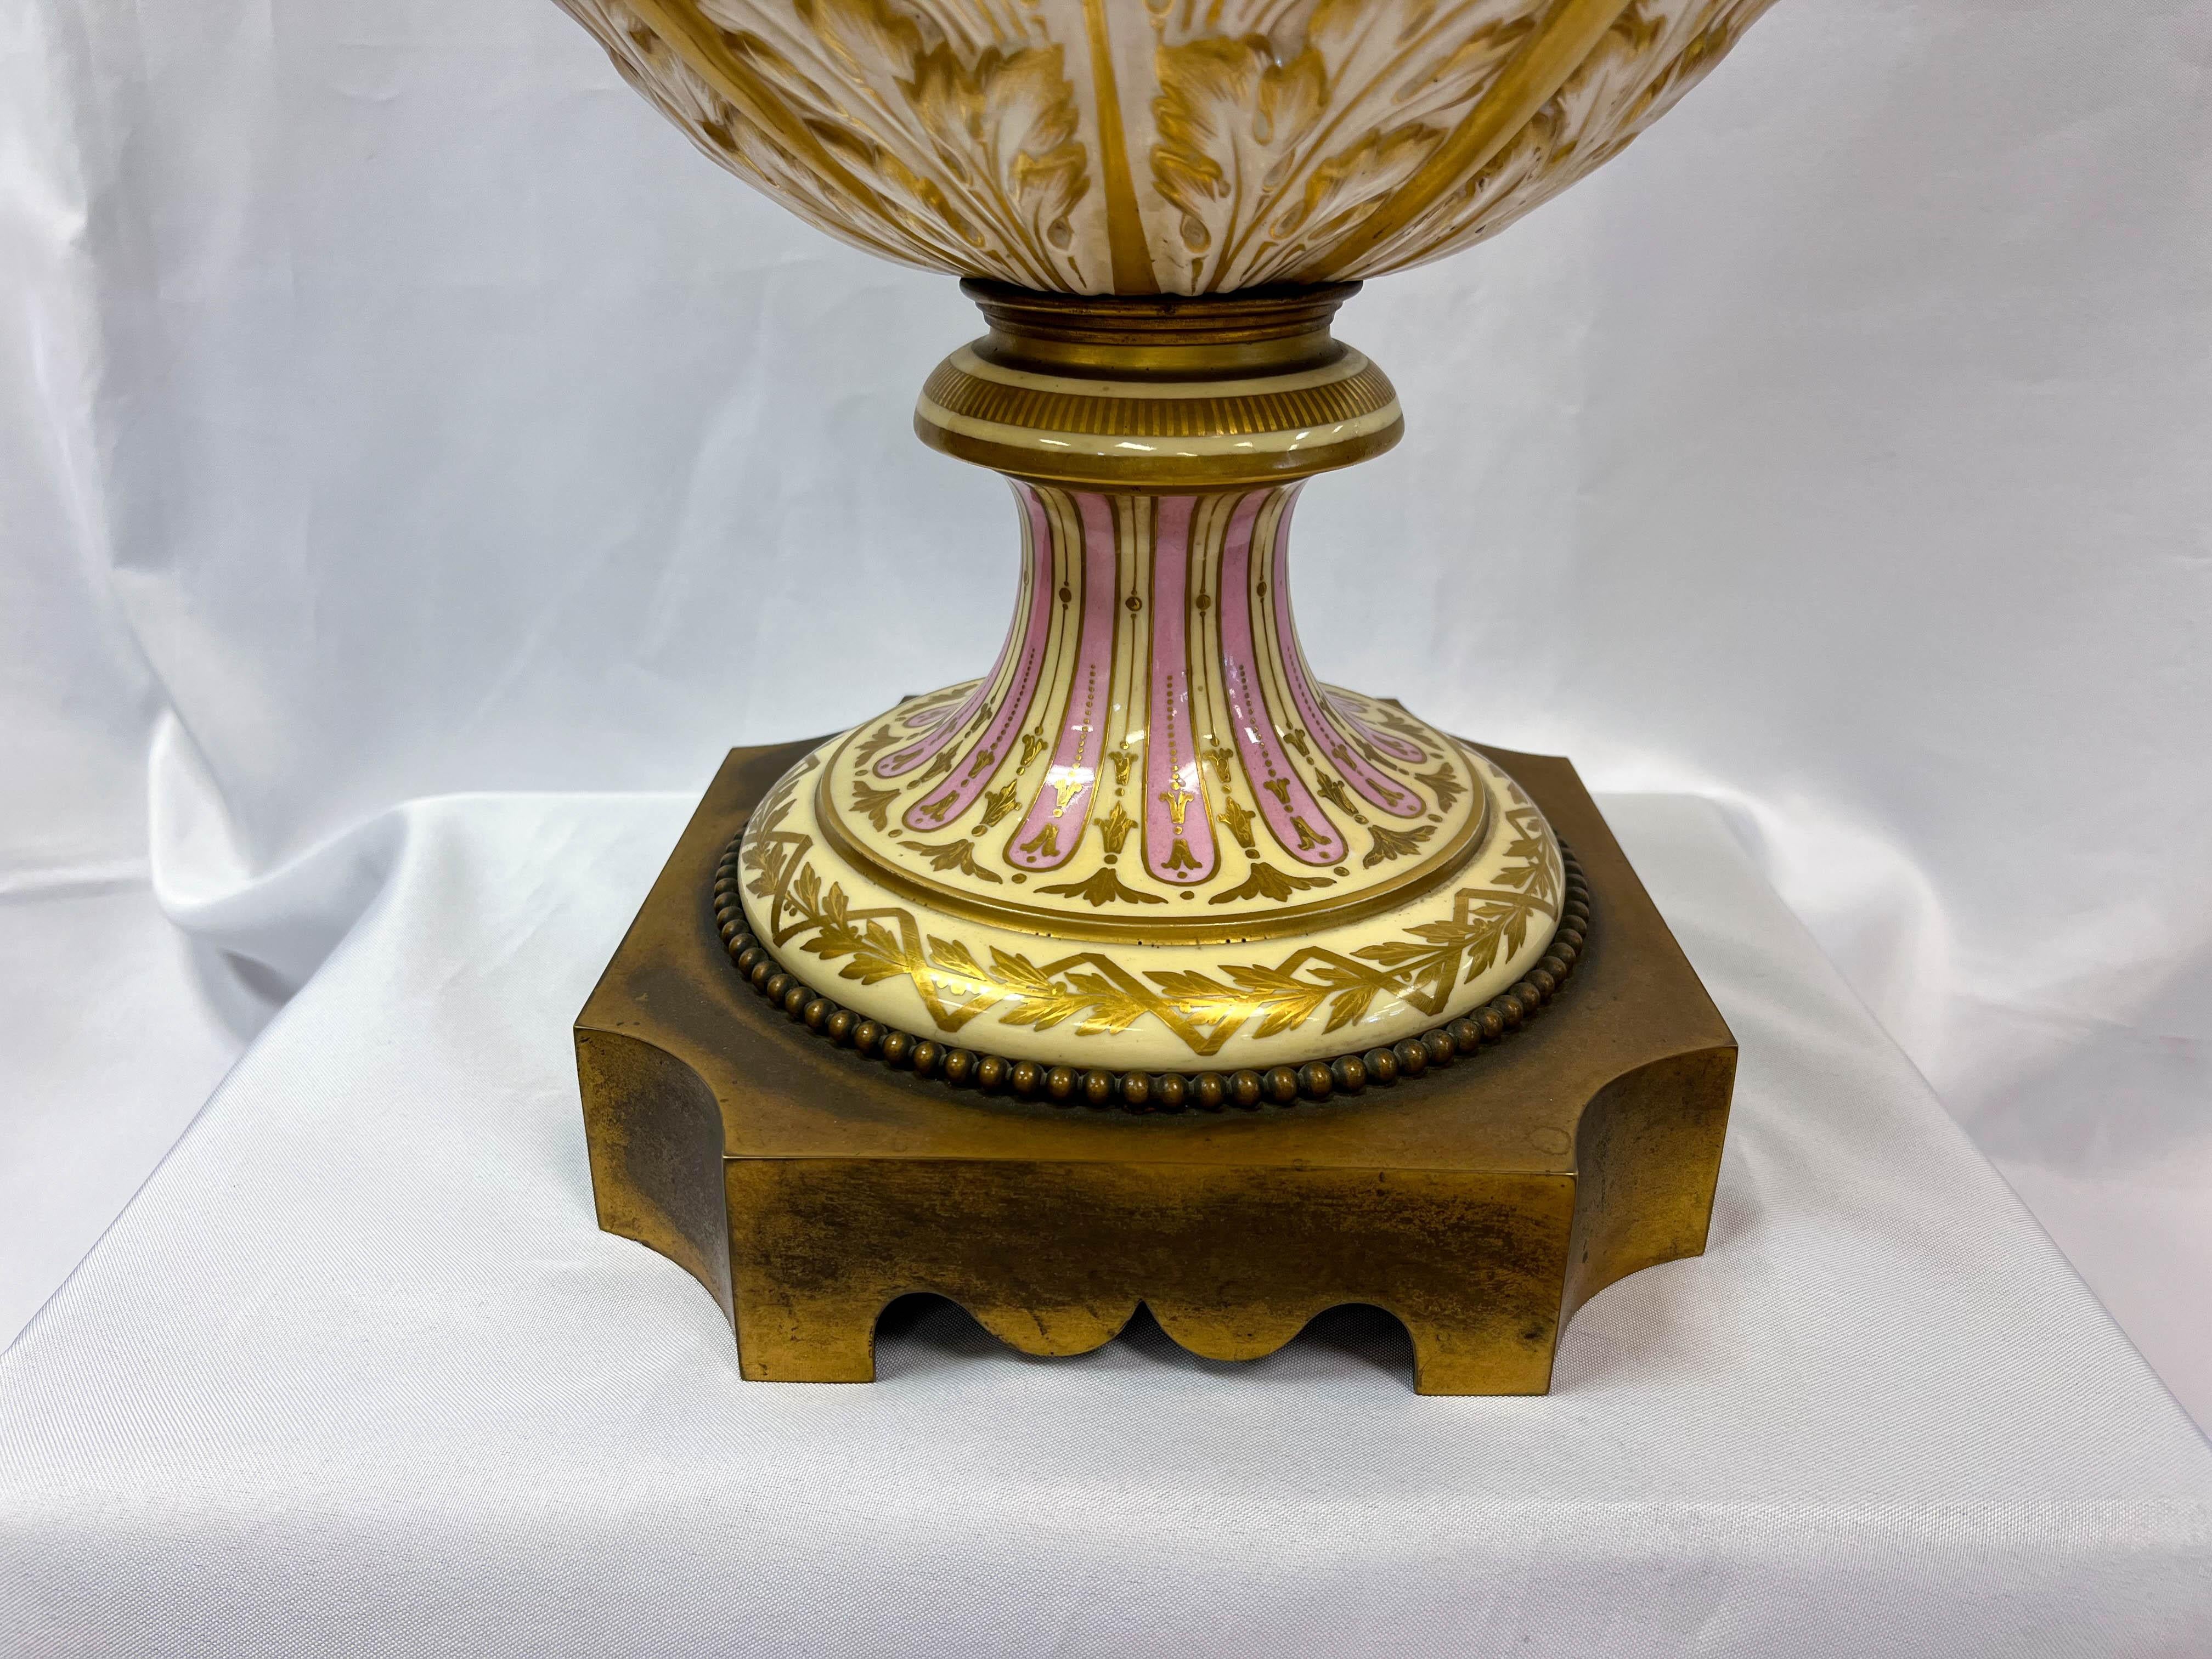 19th Century Large Scale Neoclassical Ormolu Sèvres Urn For Sale 9